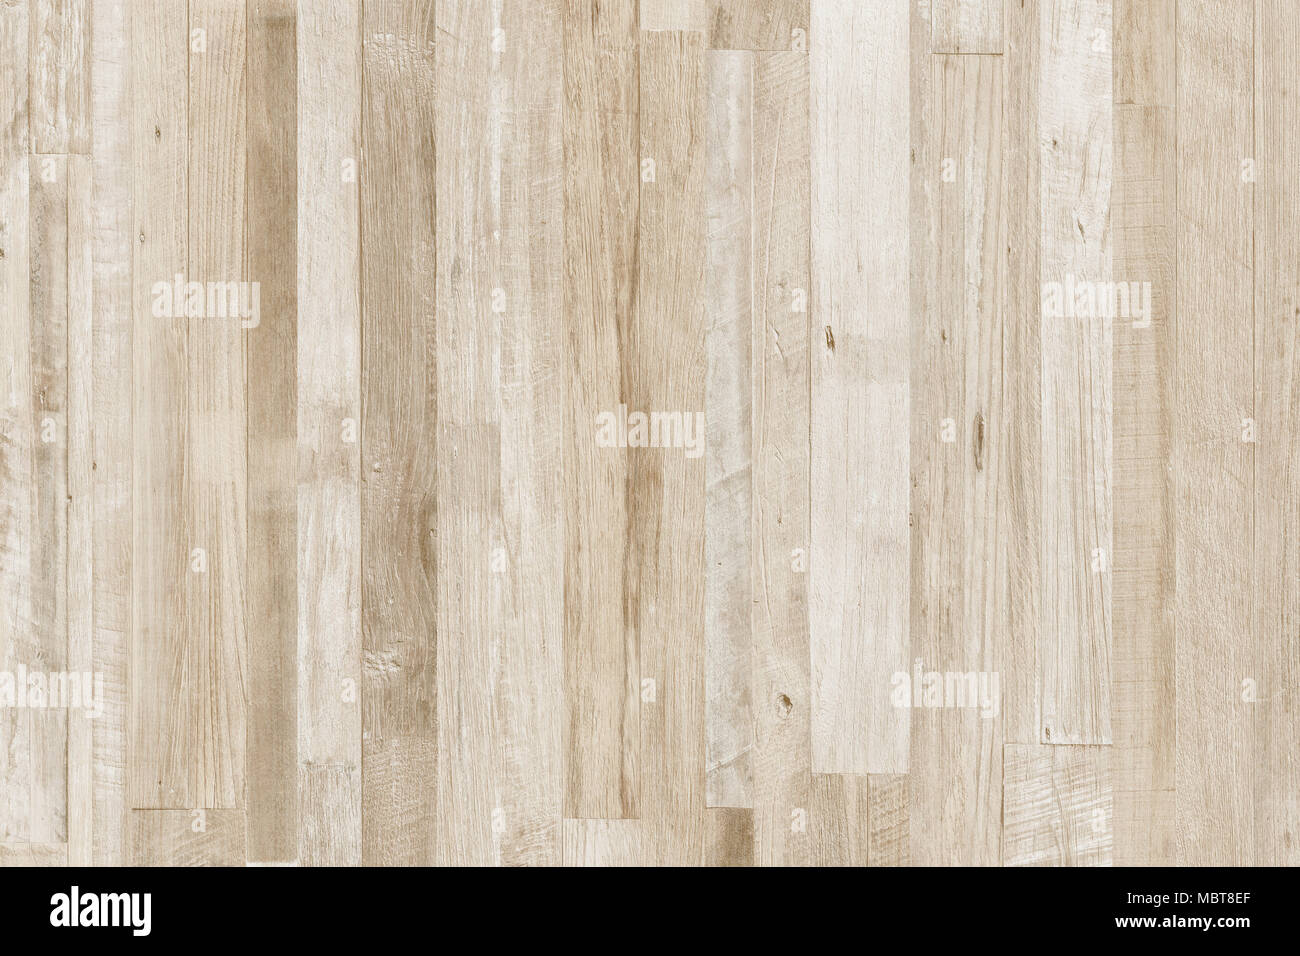 Wood wall, Mixed Species Wood flooring pattern for background texture or interior design element. Stock Photo